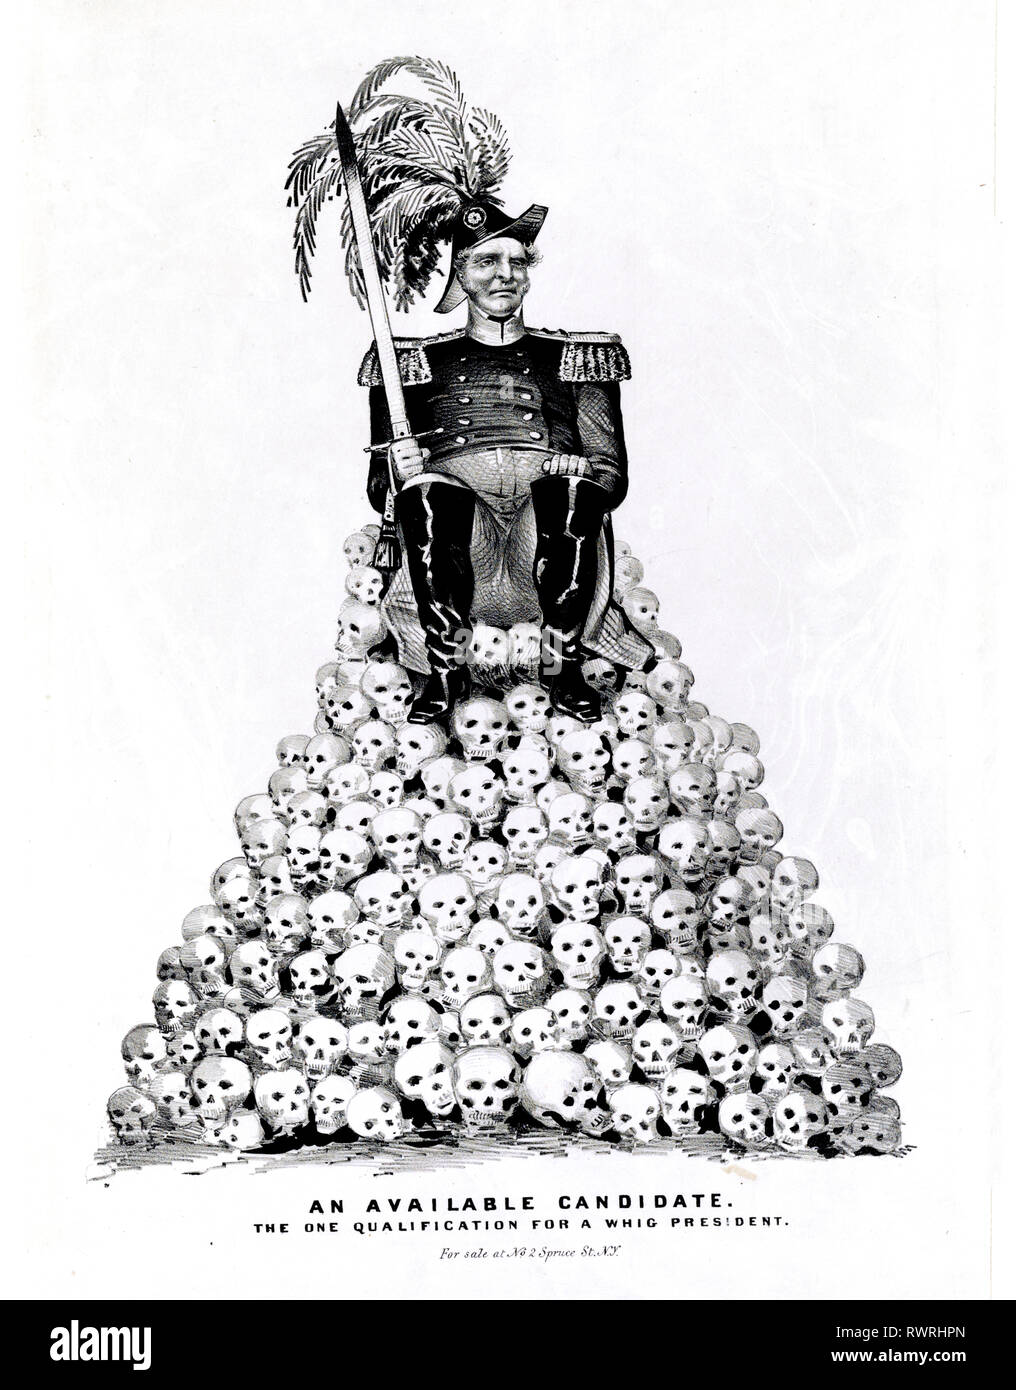 Political cartoon showing man in military uniform, with epaulets and plumed hat, holding sword and seated on pile of skulls. A scathing attack on Whig principles, as embodied in their selection of a presidential candidate for 1848. Here the 'available candidate' is either Gen. Zachary Taylor or Winfield Scott, both of whom were contenders for the nomination before the June convention. The figure sits atop a pyramid of skulls, holding a blood-stained sword. The skulls and sword allude to the bloody but successful Mexican War campaigns waged by both Taylor and Scott Stock Photo